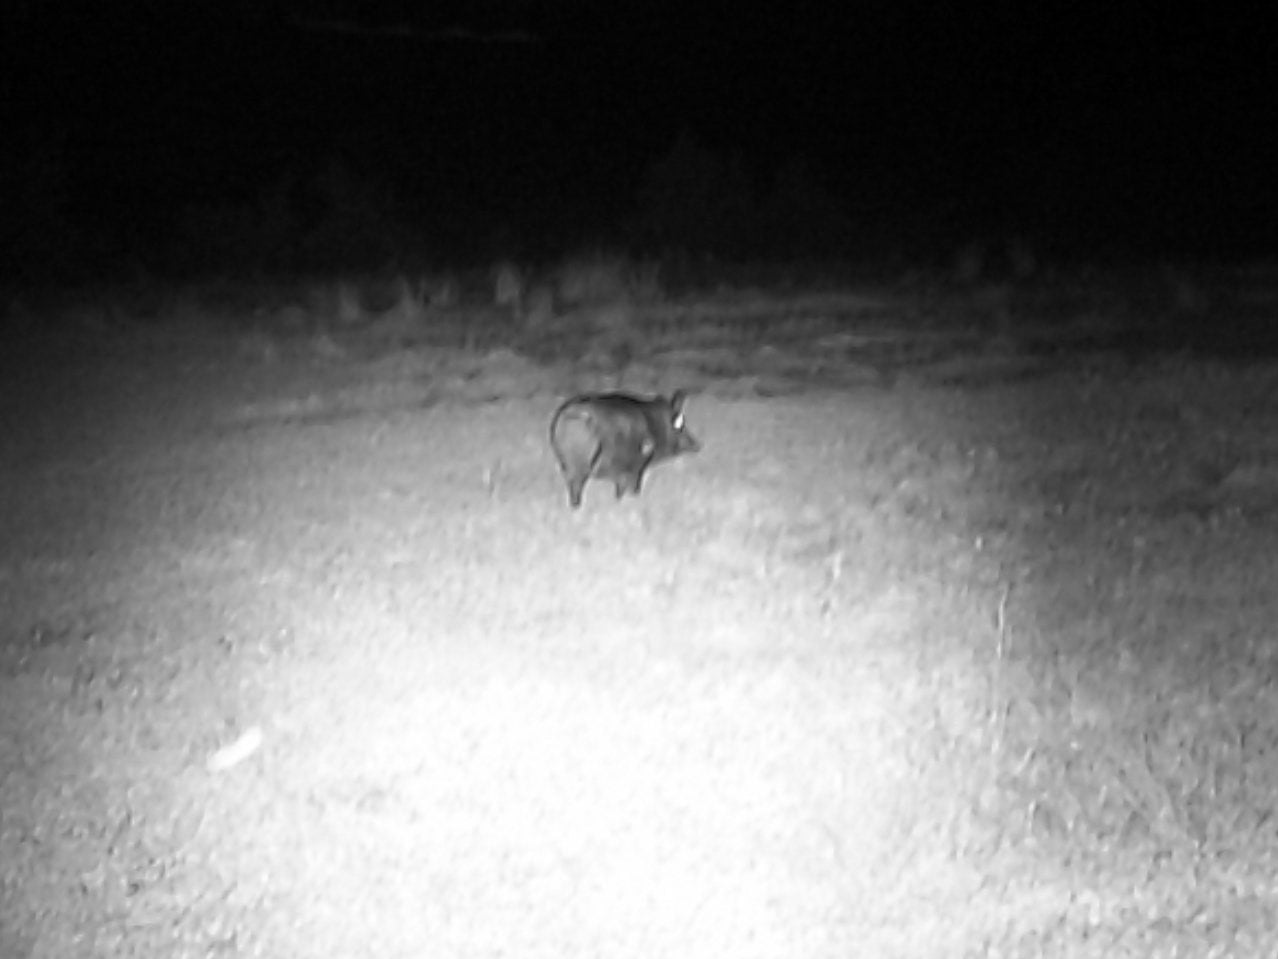 night vision view of pig